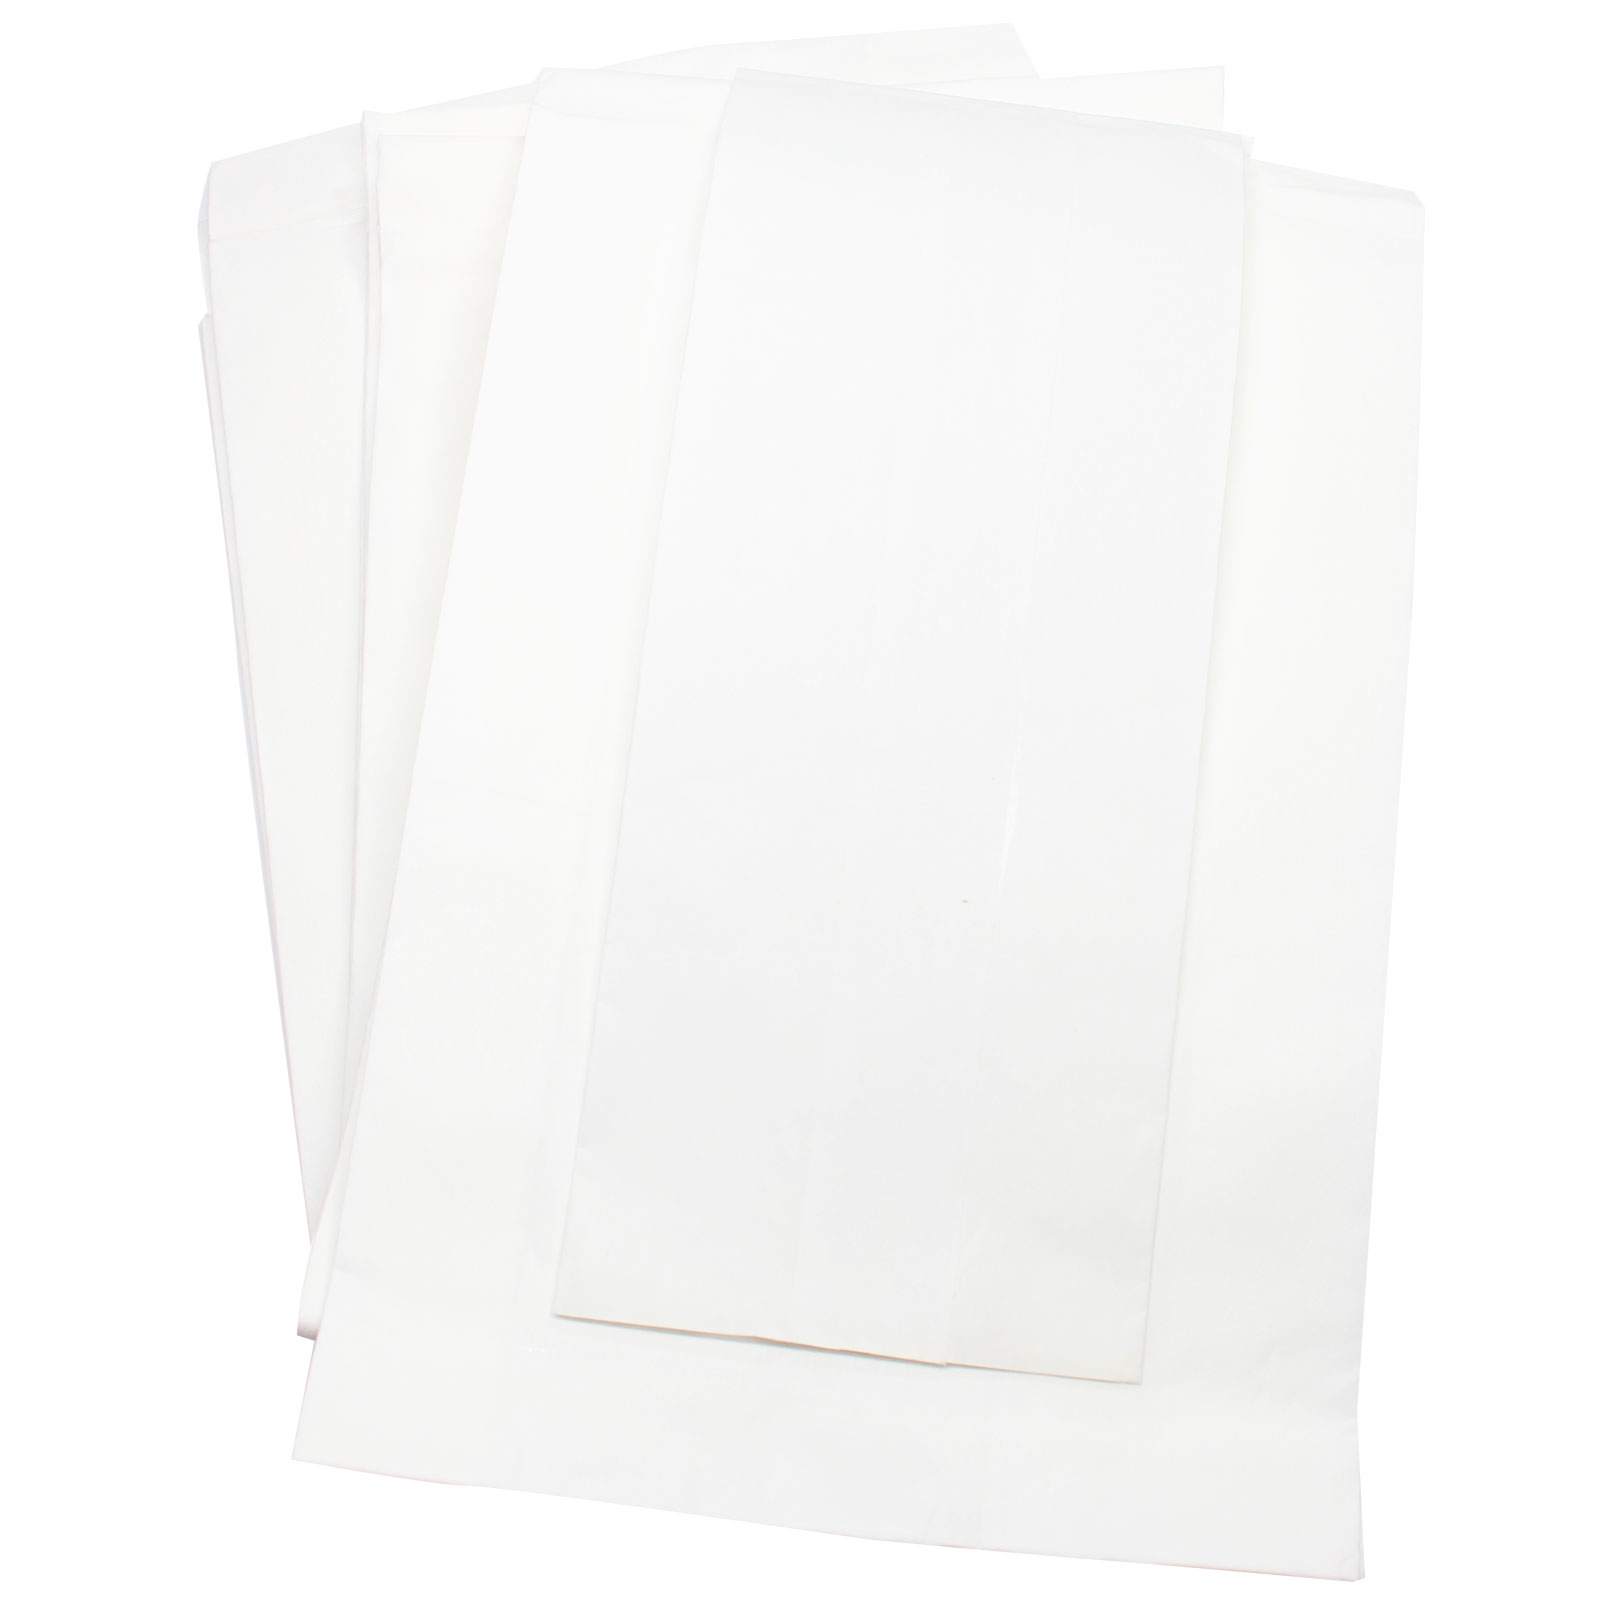 24 Replacement for Singer SST185 Vacuum Bags - Compatible with Singer SUB-1 Vacuum Bags (8-Pack - 3 Vacuum Bags per Pack) - image 3 of 4